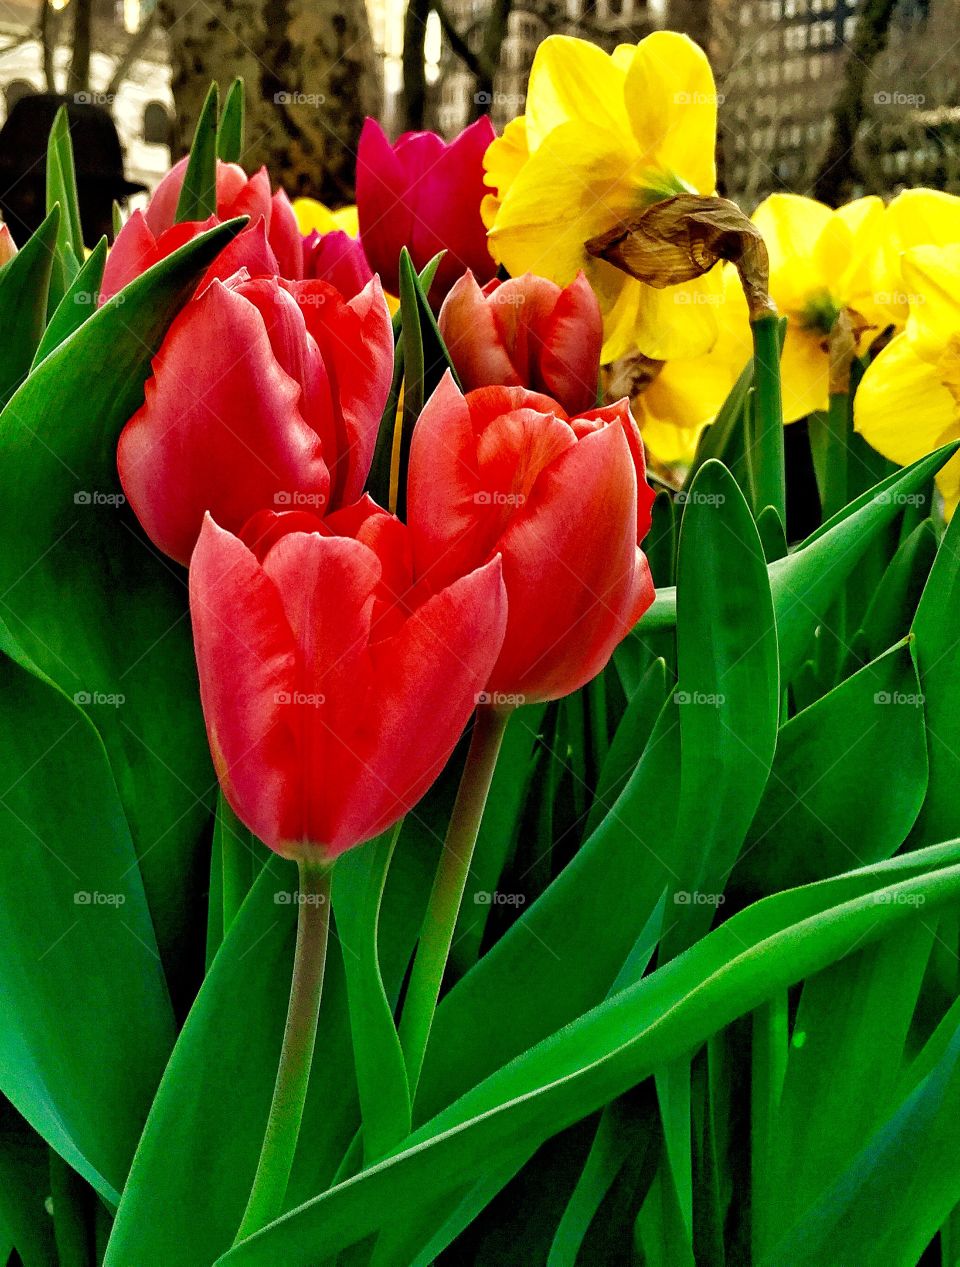 Spring Time Tulips, New York City 